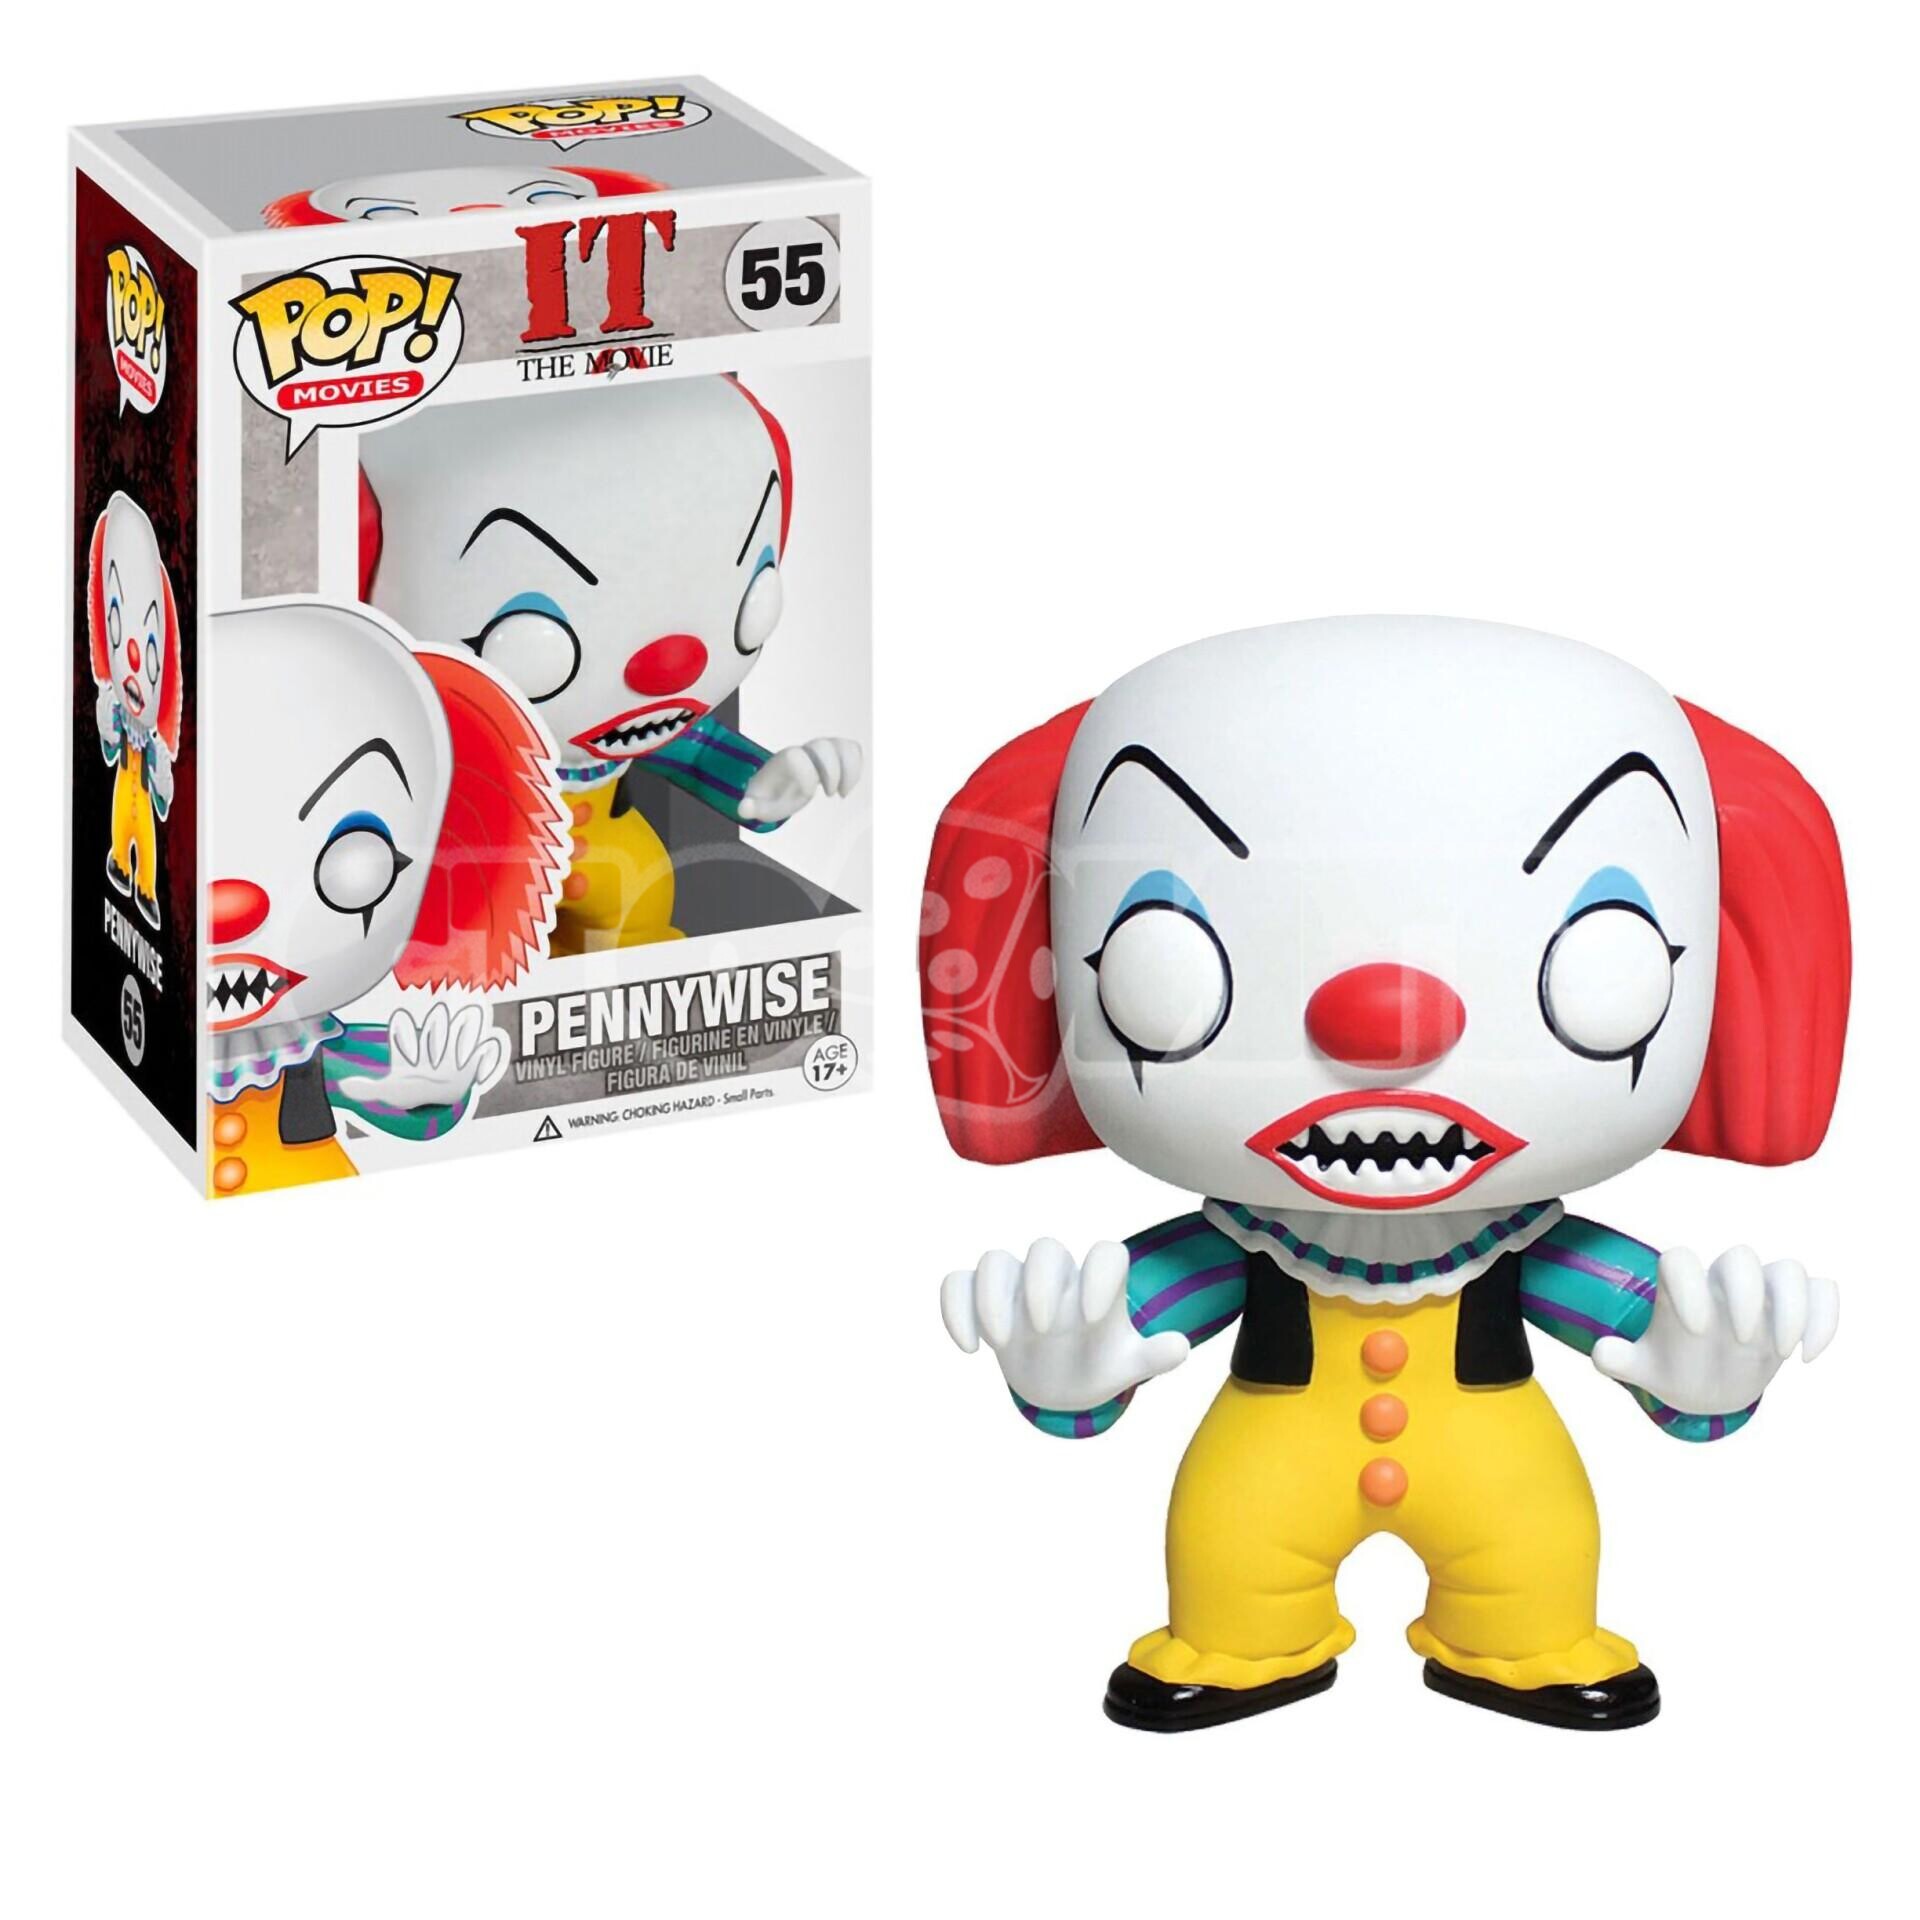 Funko Pop. Movies IT Pennywise (55)